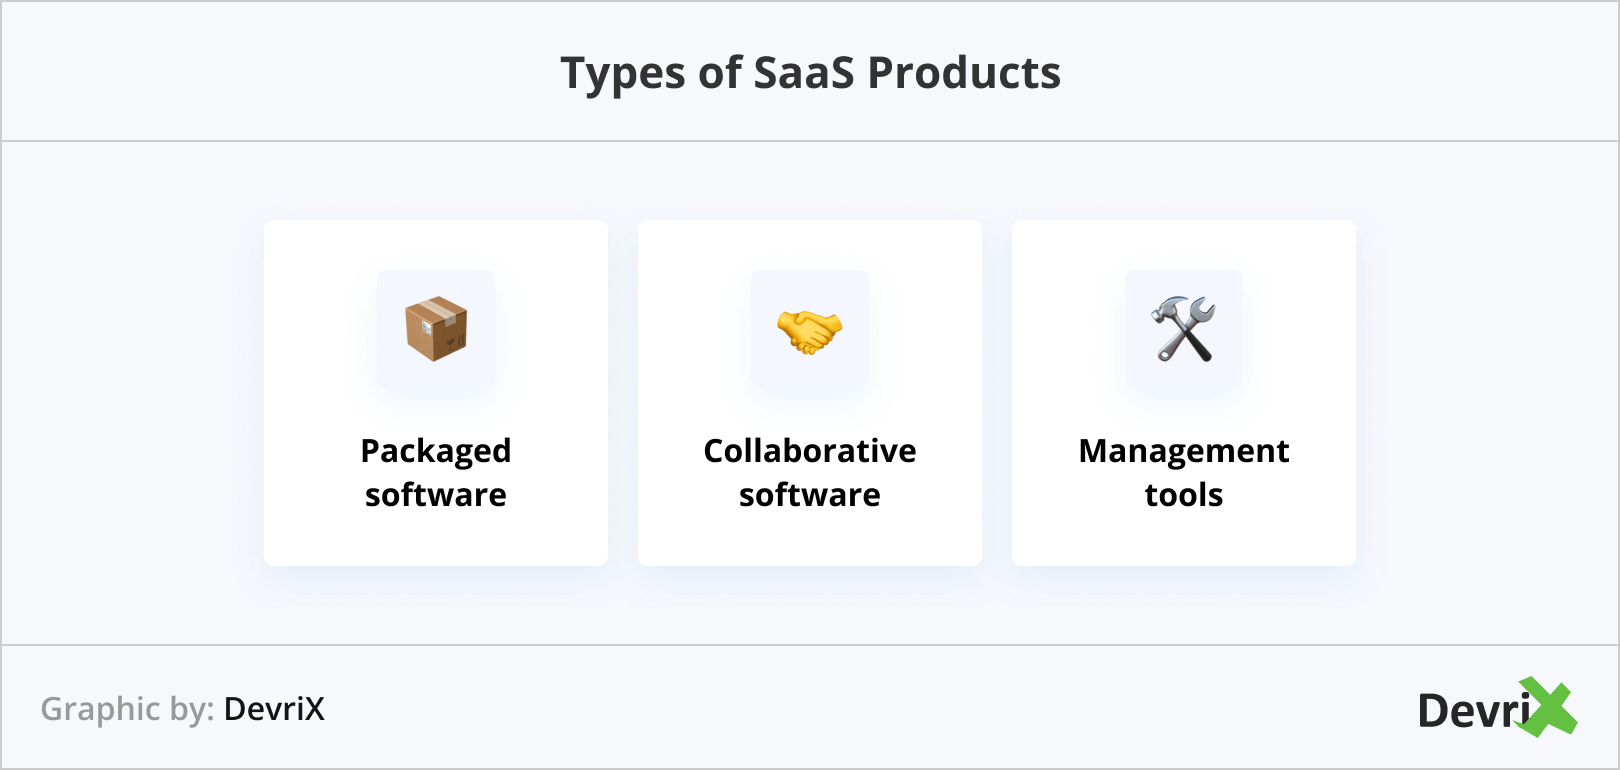 Types of SaaS Products